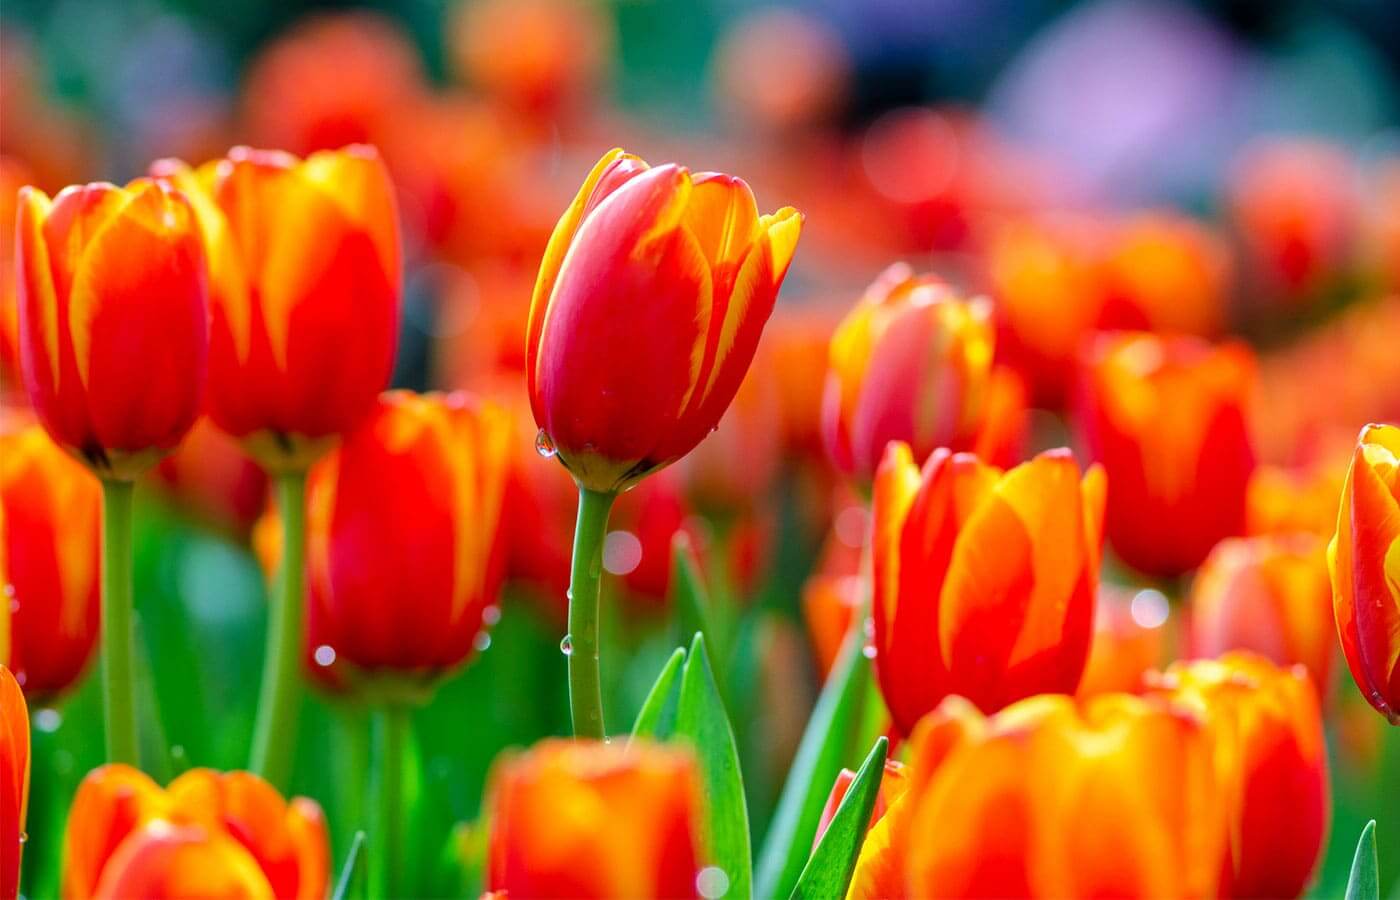 A close look at red and yellow tulips on a rainy day